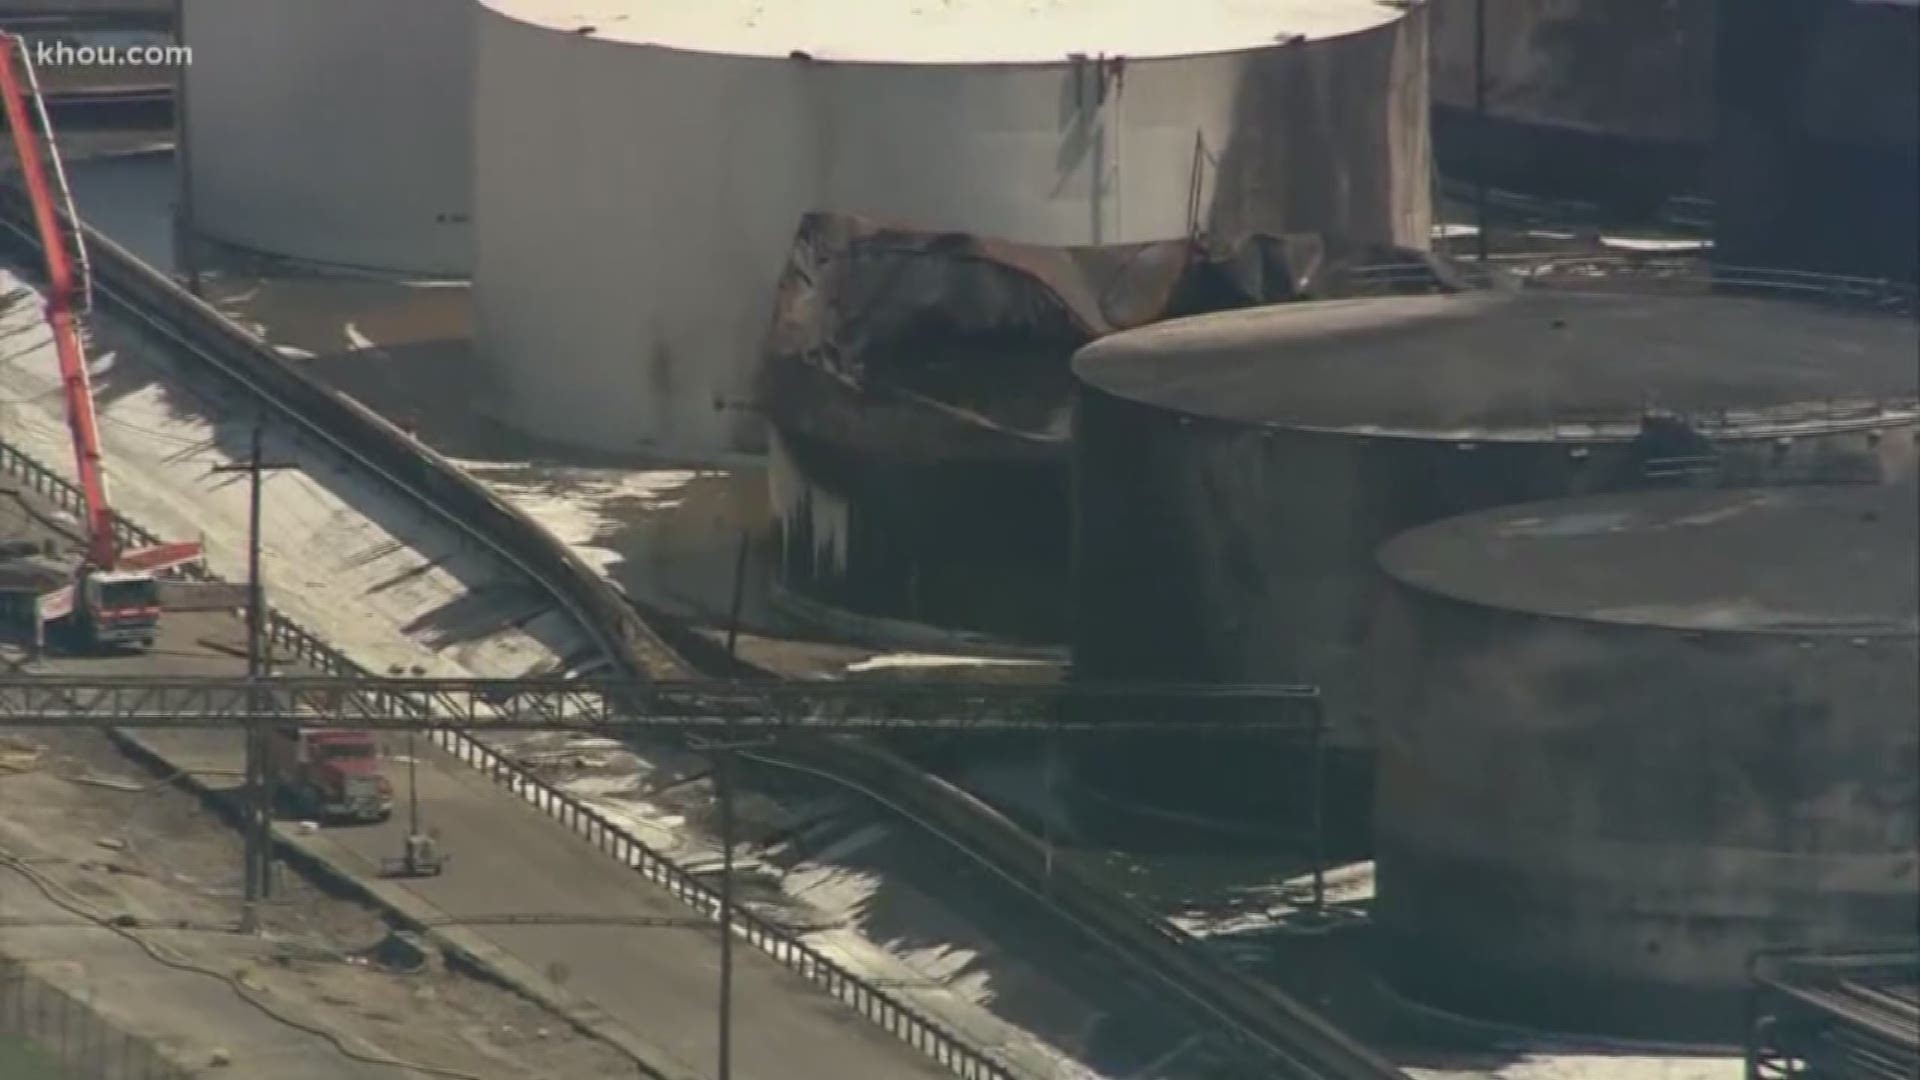 A dike wall containing a chemical or chemicals released during the ITC tank farm fire partially collapsed, according to the Deer Park Office of Emergency Management.